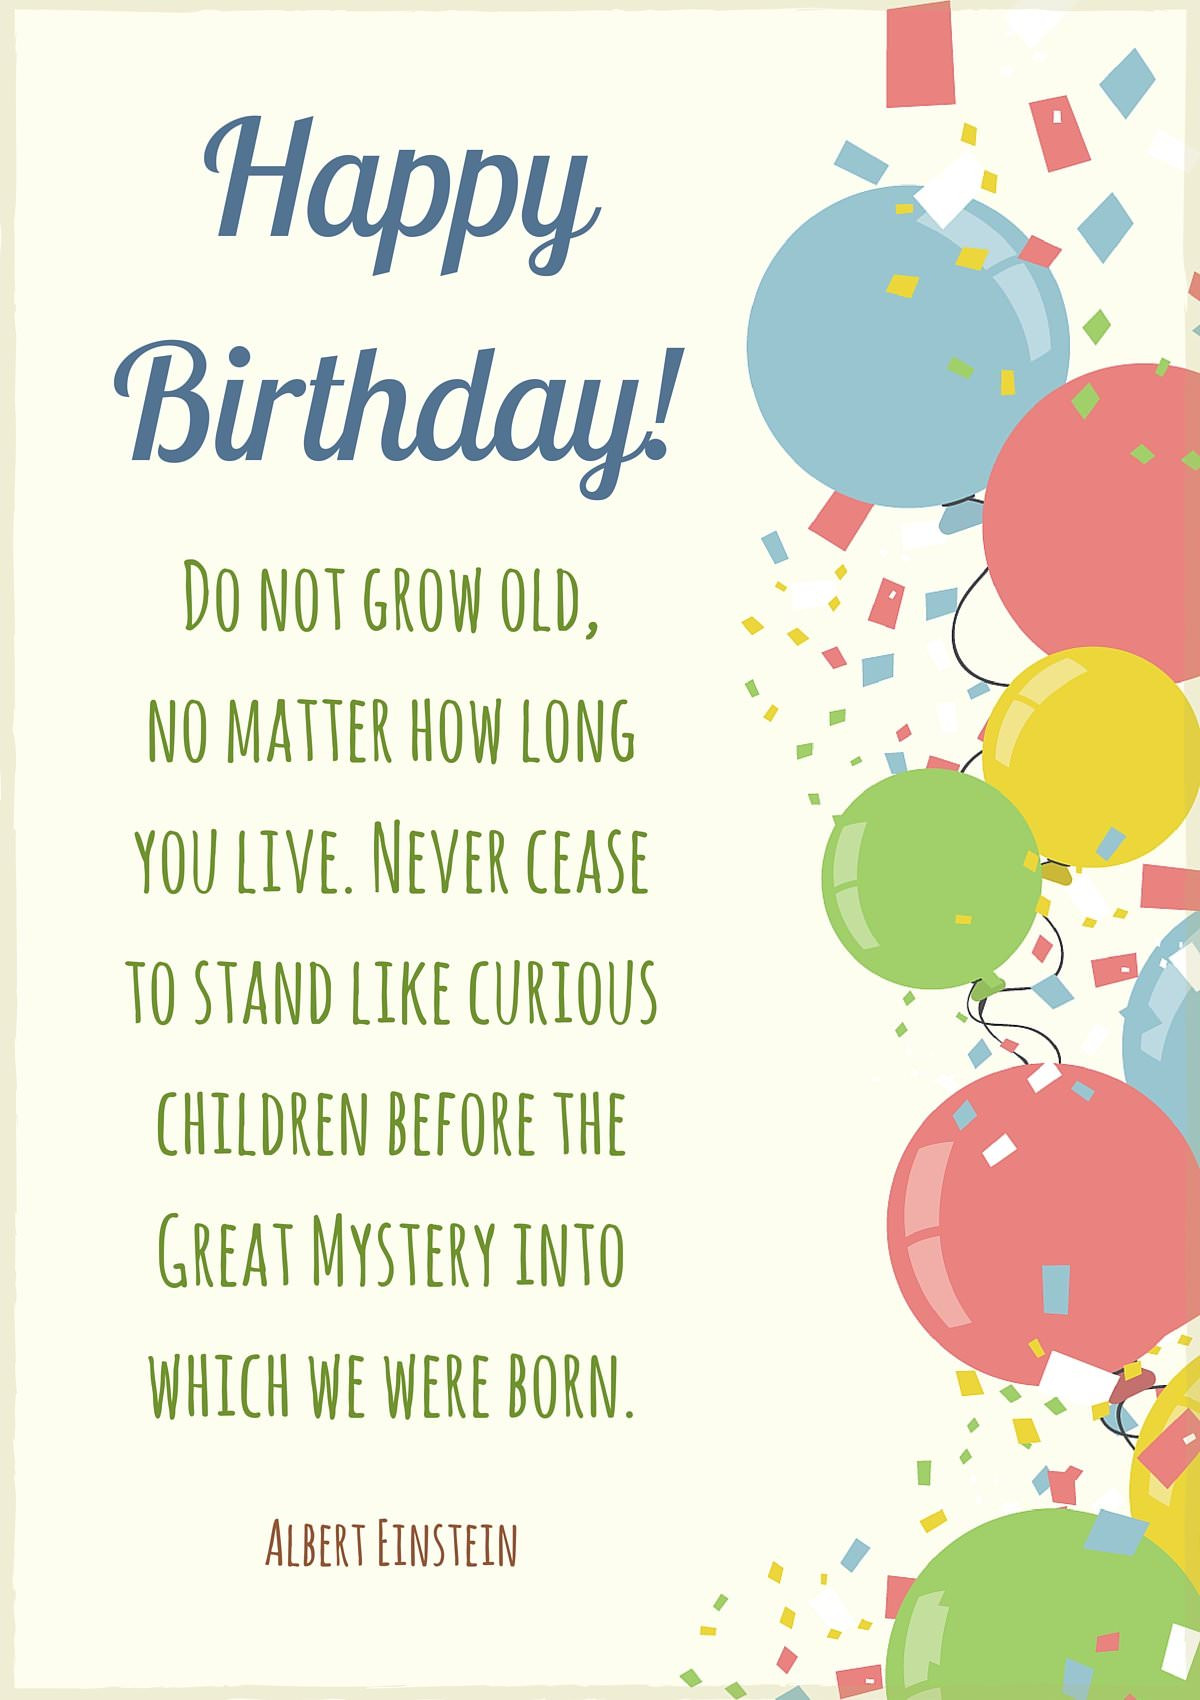 Happy Birthday Famous Quotes
 Hand picked List of Insightful Famous Birthday Quotes